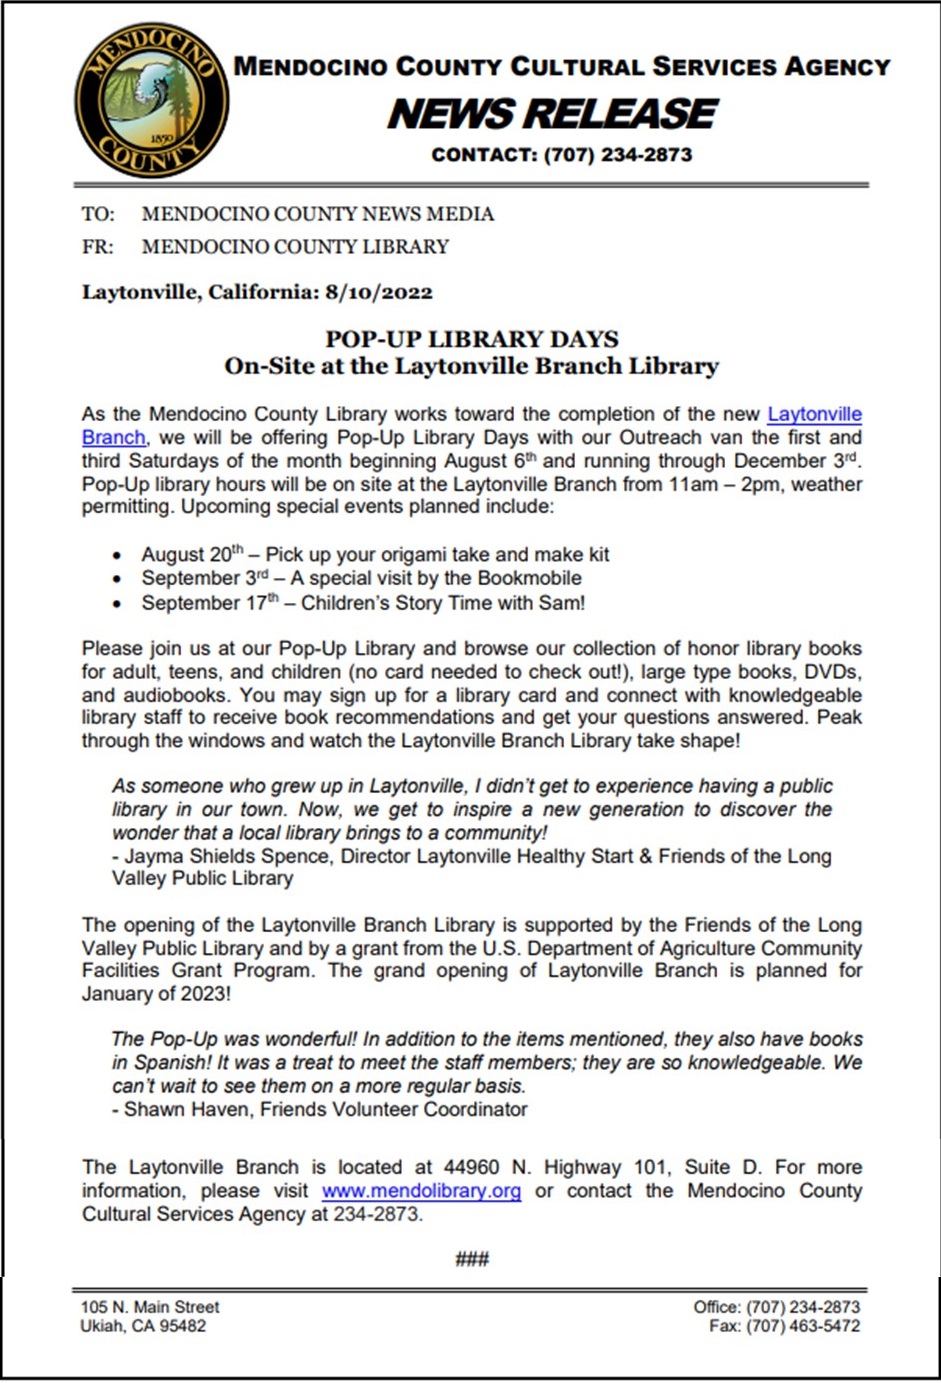 Laytonville pop-up library press release